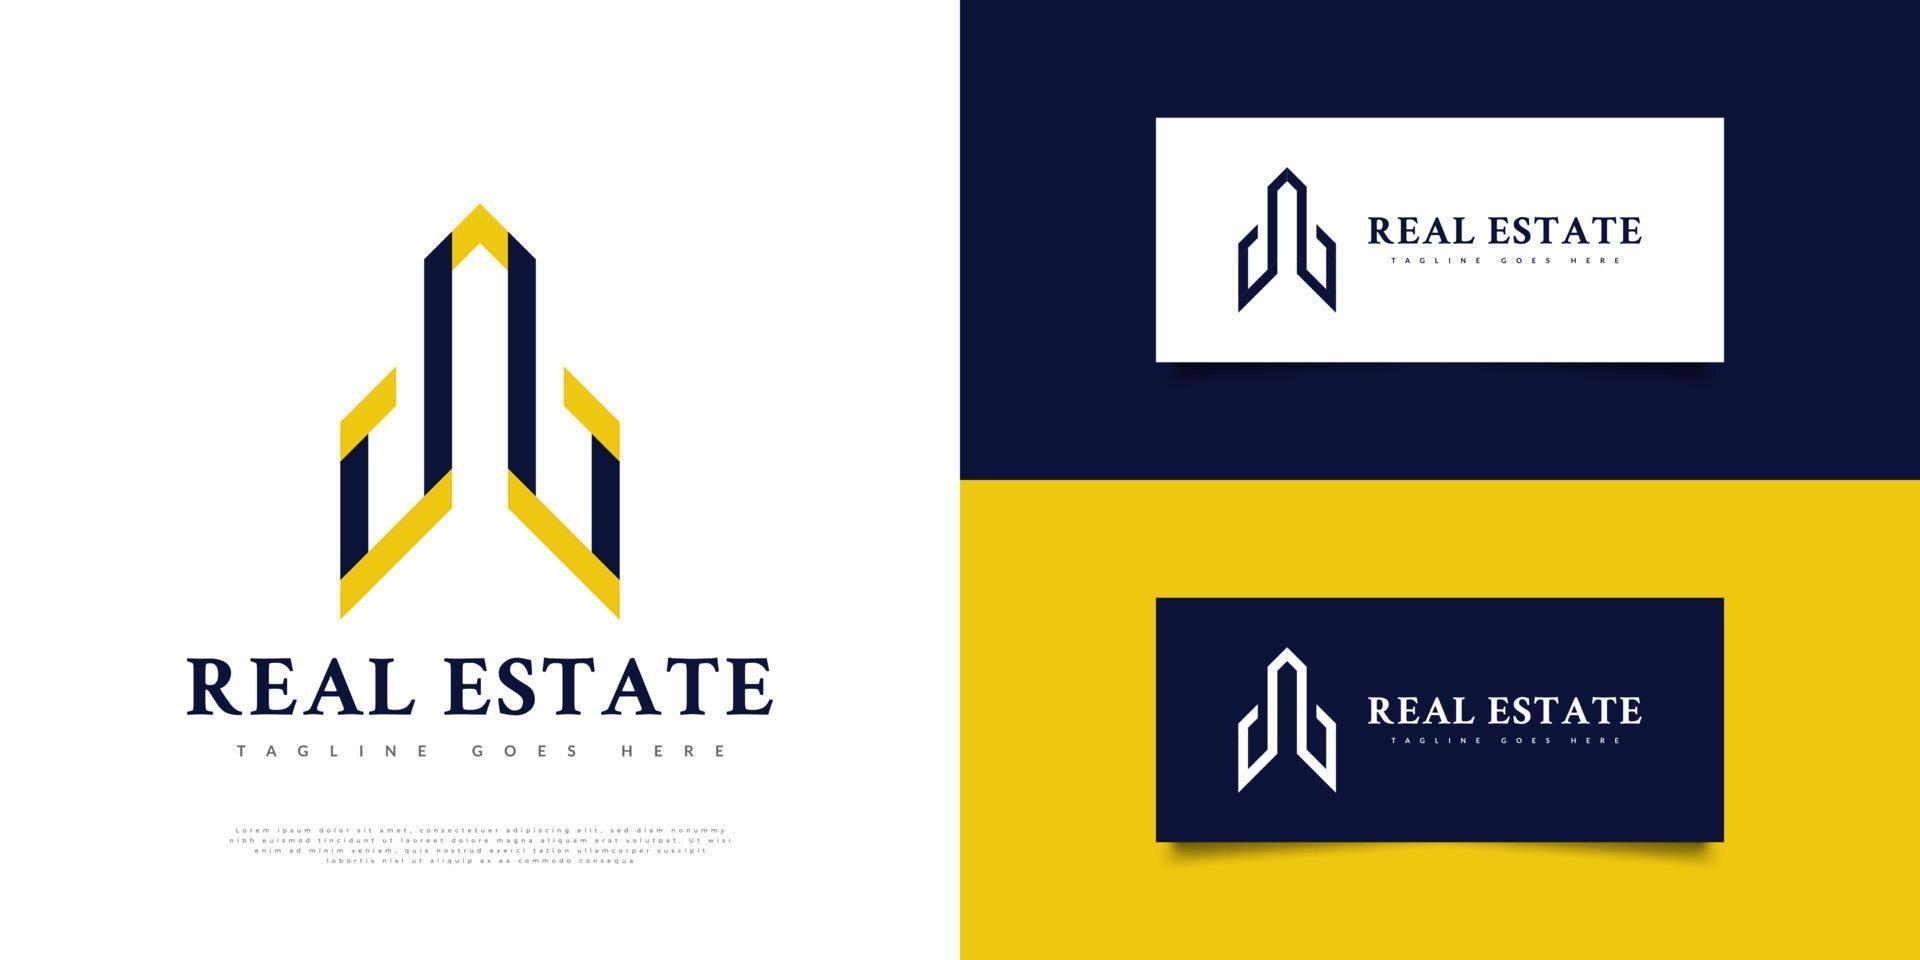 Abstract Simple and Clean Real Estate Logo Design in Blue and Yellow. Construction, Architecture or Building Logo Design vector